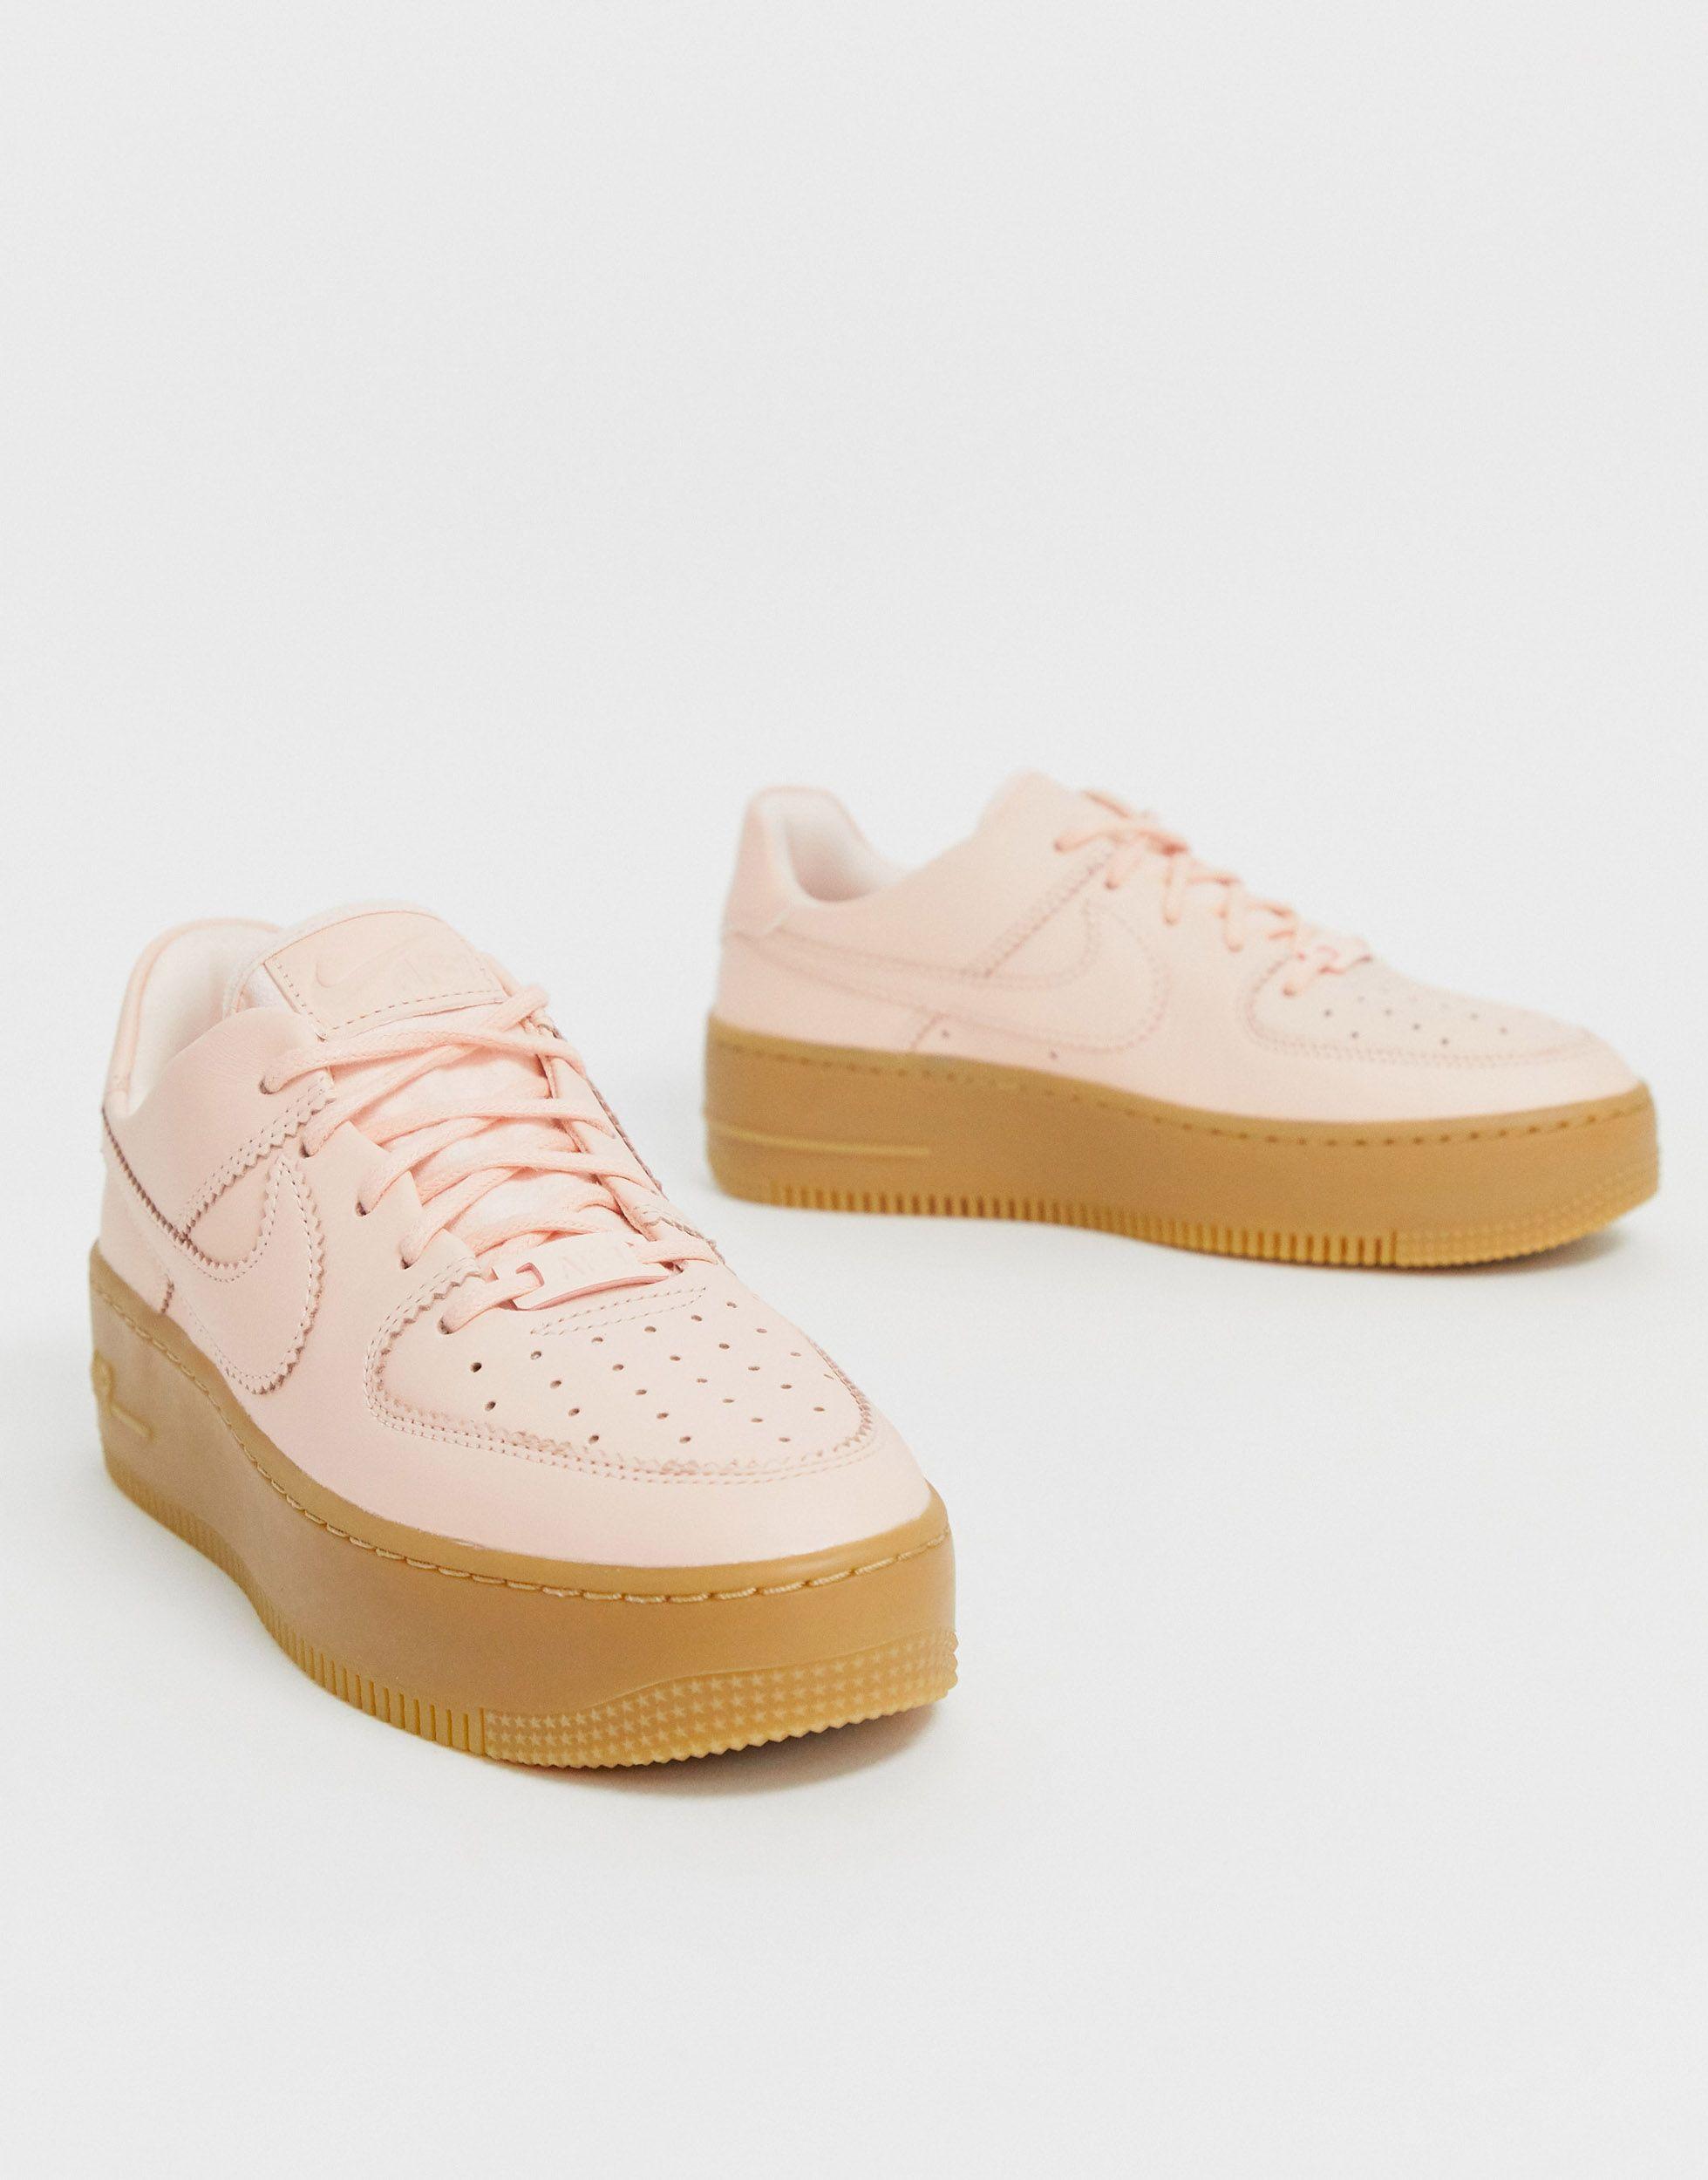 Nike Rubber Pale Gum Sole Air Force 1 Sage Low Trainers in Pink | Lyst